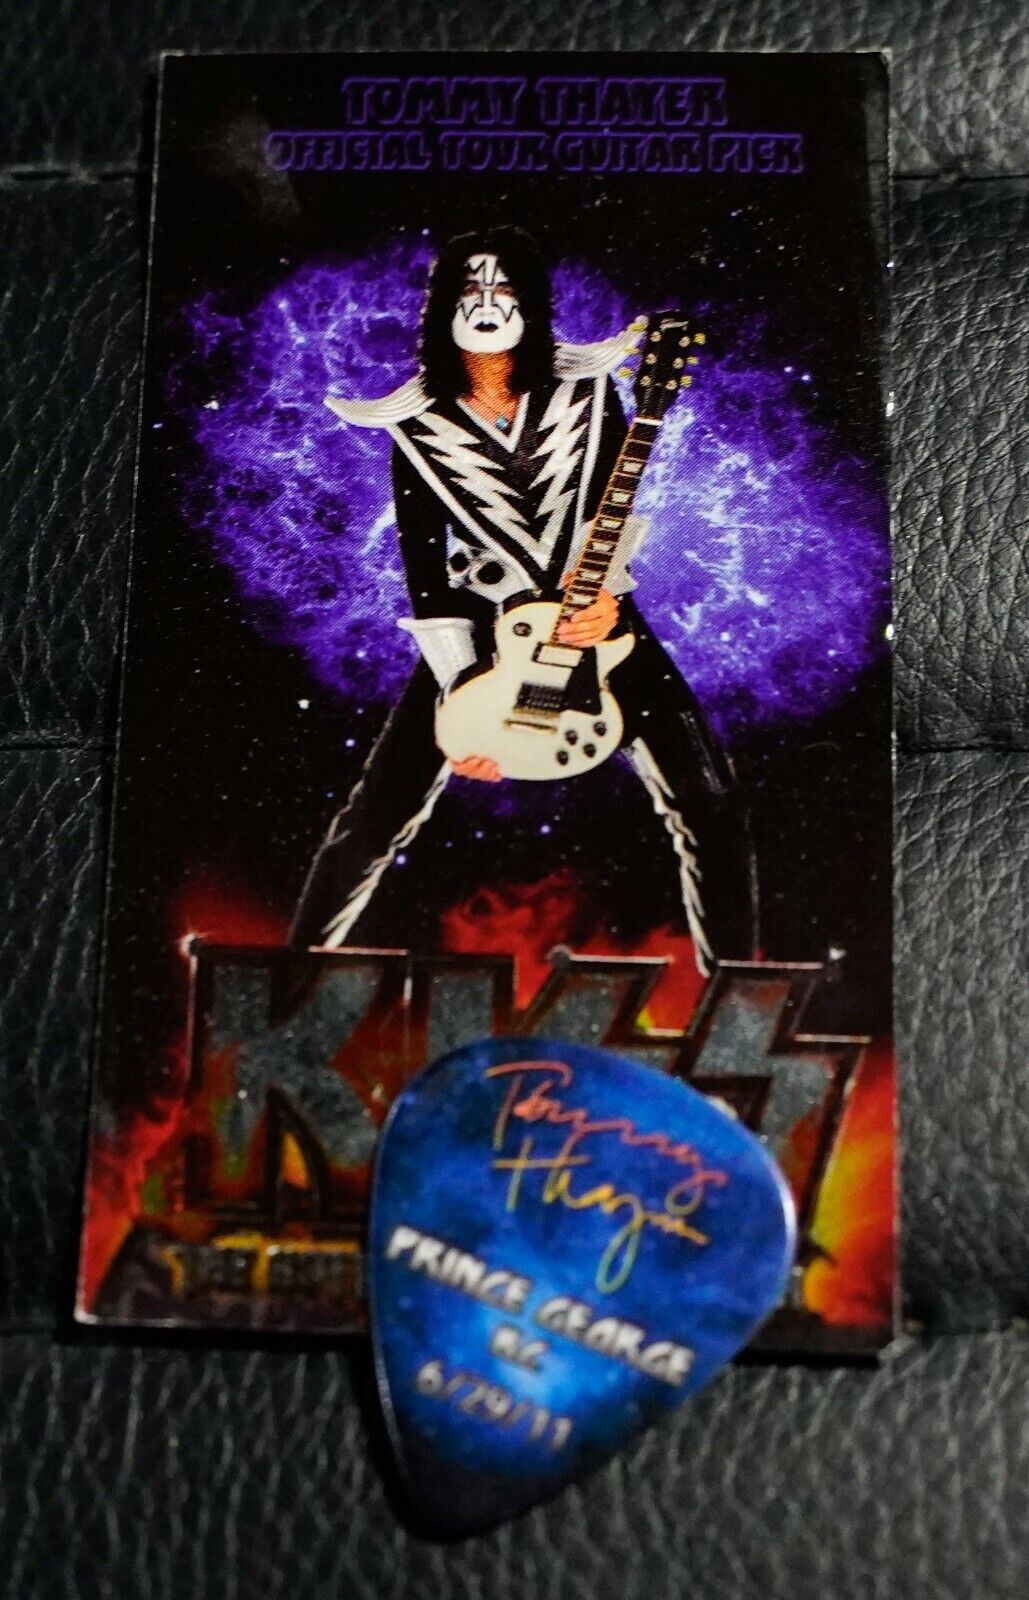 Kiss 062911 Prince George Tommy Thayer Guitar Pick Hottest Show Earth Tour